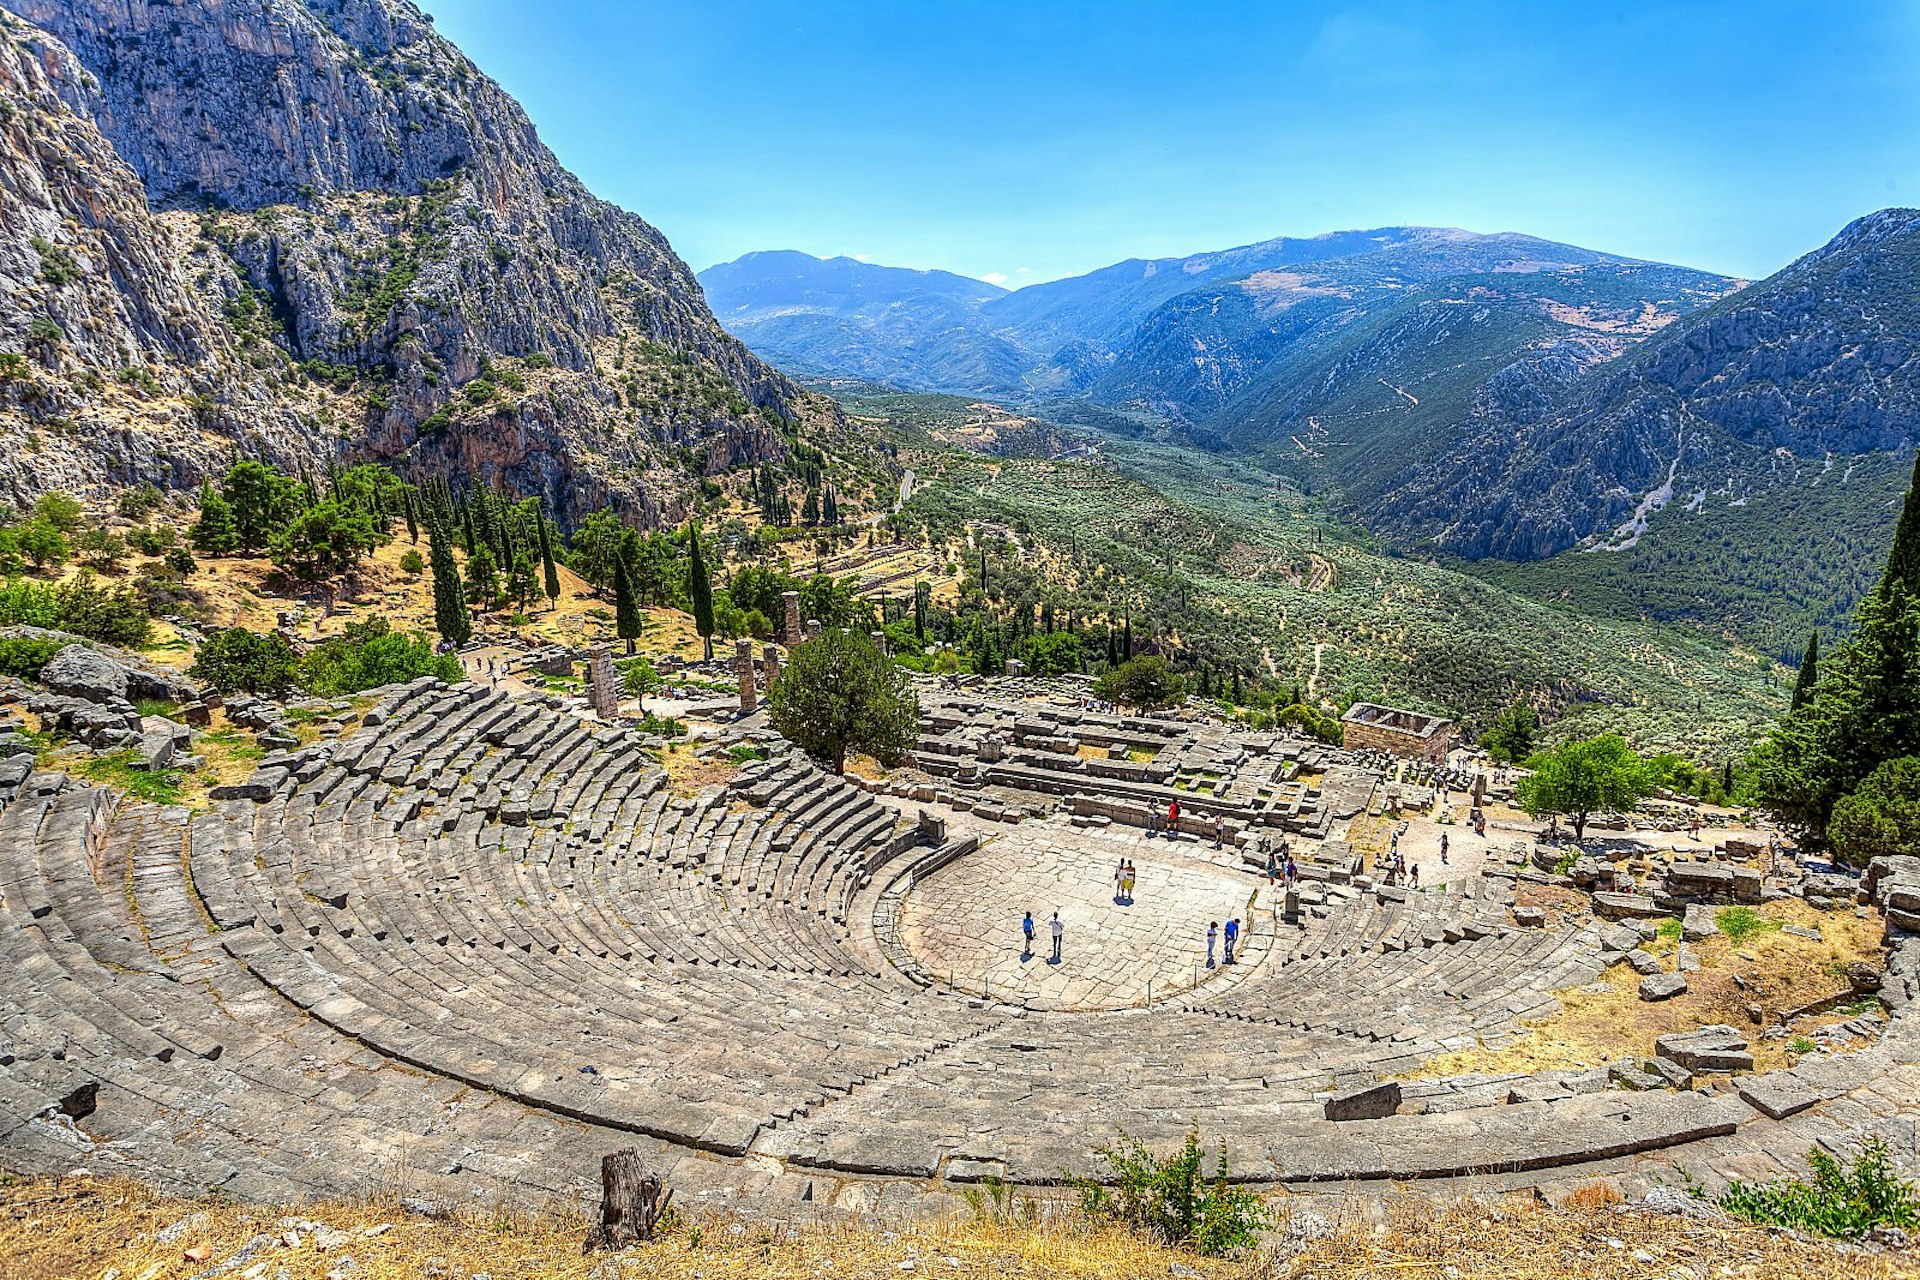 The well preserved remains of an ancient stone theatre on a mountainside; there is a lovely view down into a green valley below, surrounded by further mountain peaks.